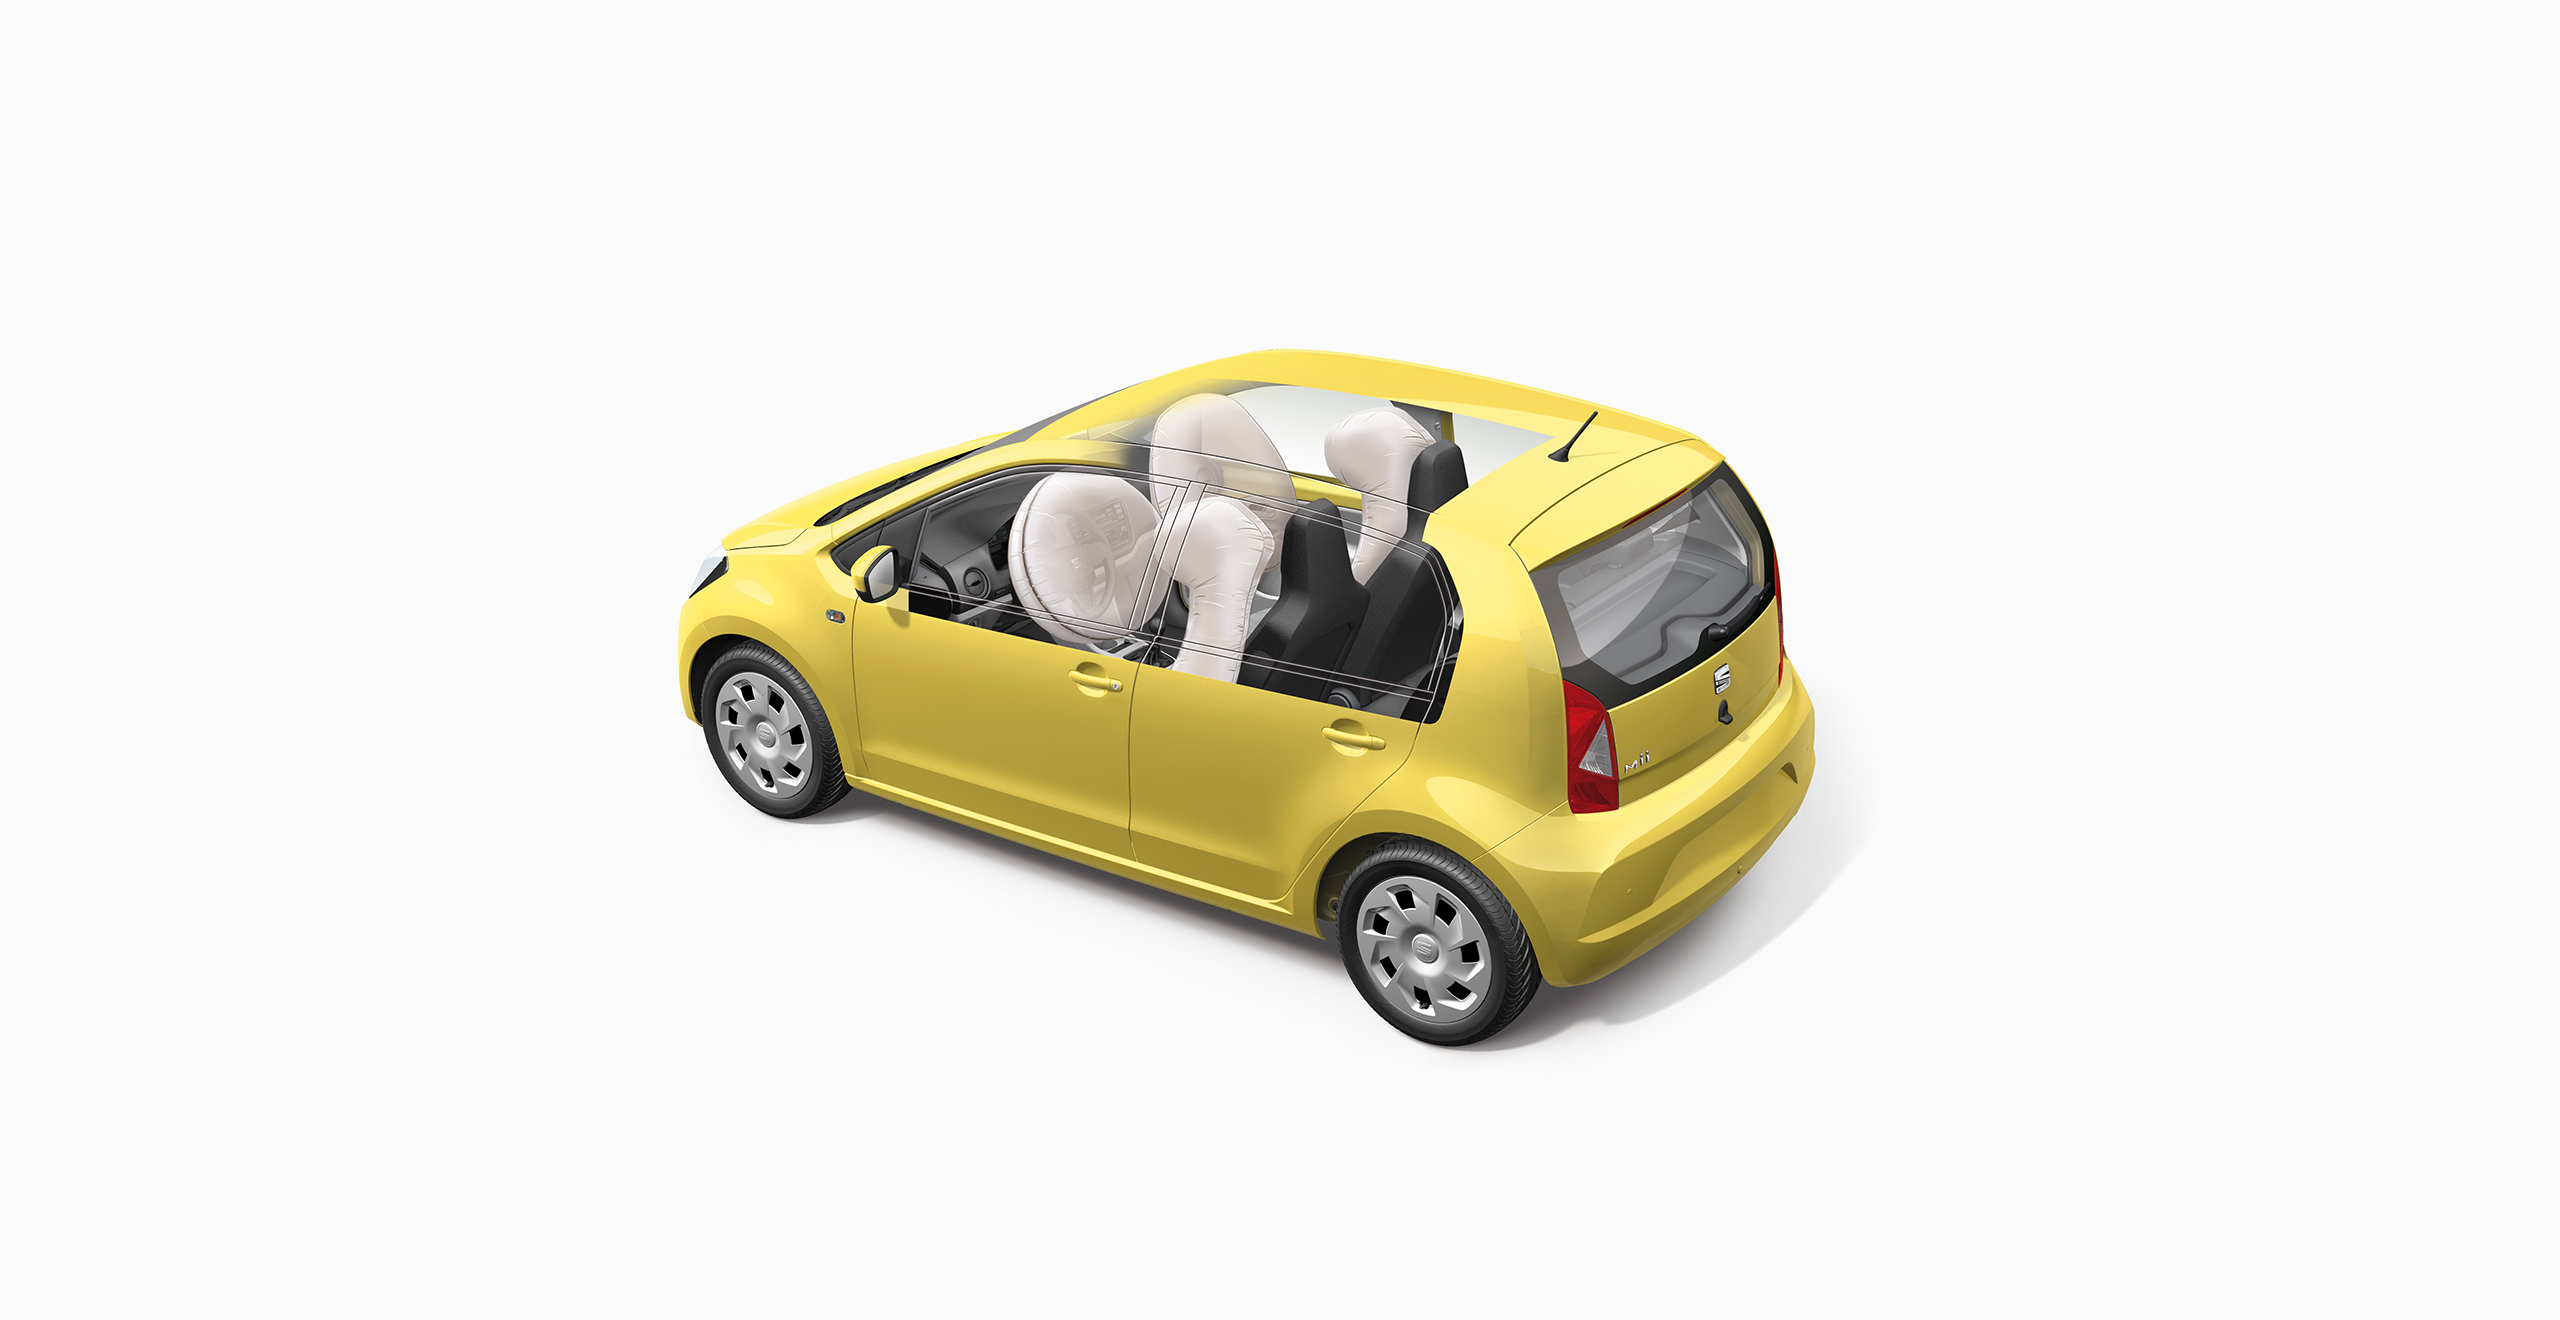 SEAT Mii airbags safety. Showing inside of the car: front and side airbags